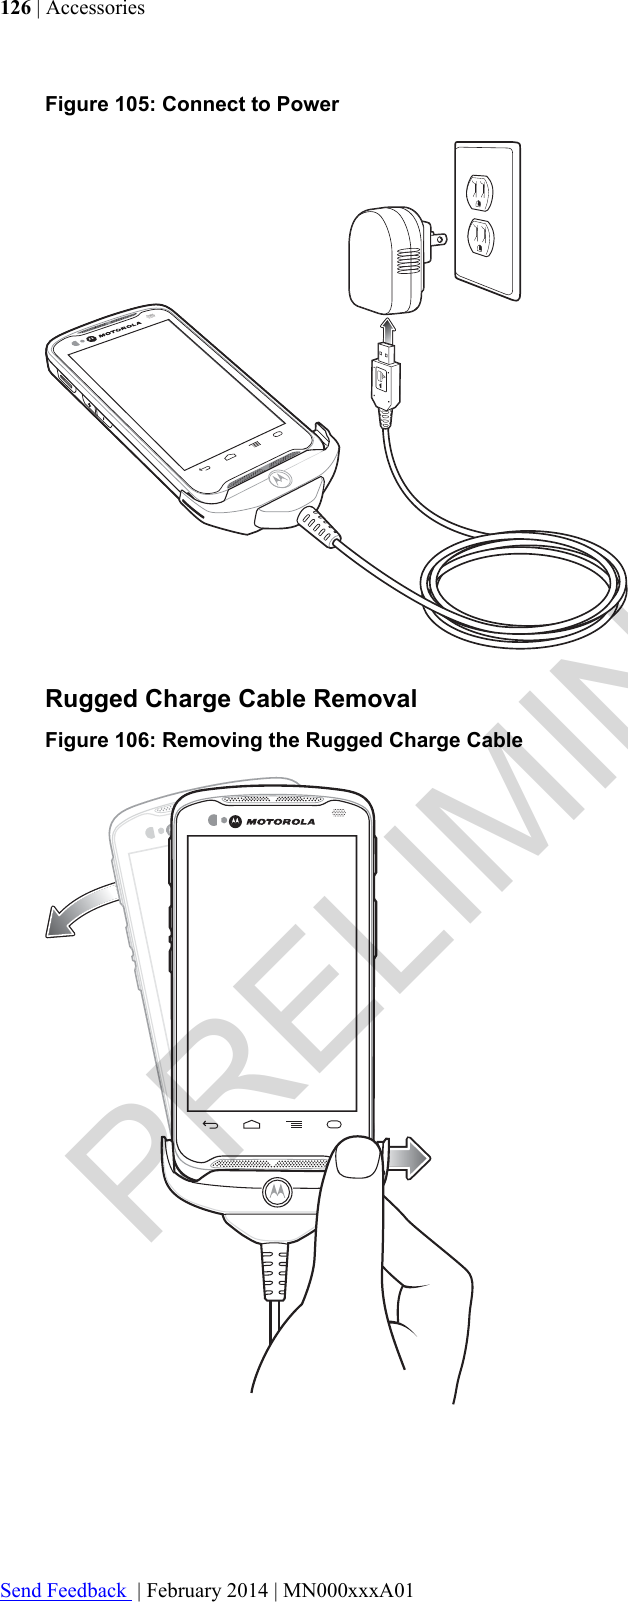 Figure 105: Connect to PowerRugged Charge Cable RemovalFigure 106: Removing the Rugged Charge Cable126 | AccessoriesSend Feedback  | February 2014 | MN000xxxA01PRELIMINARY